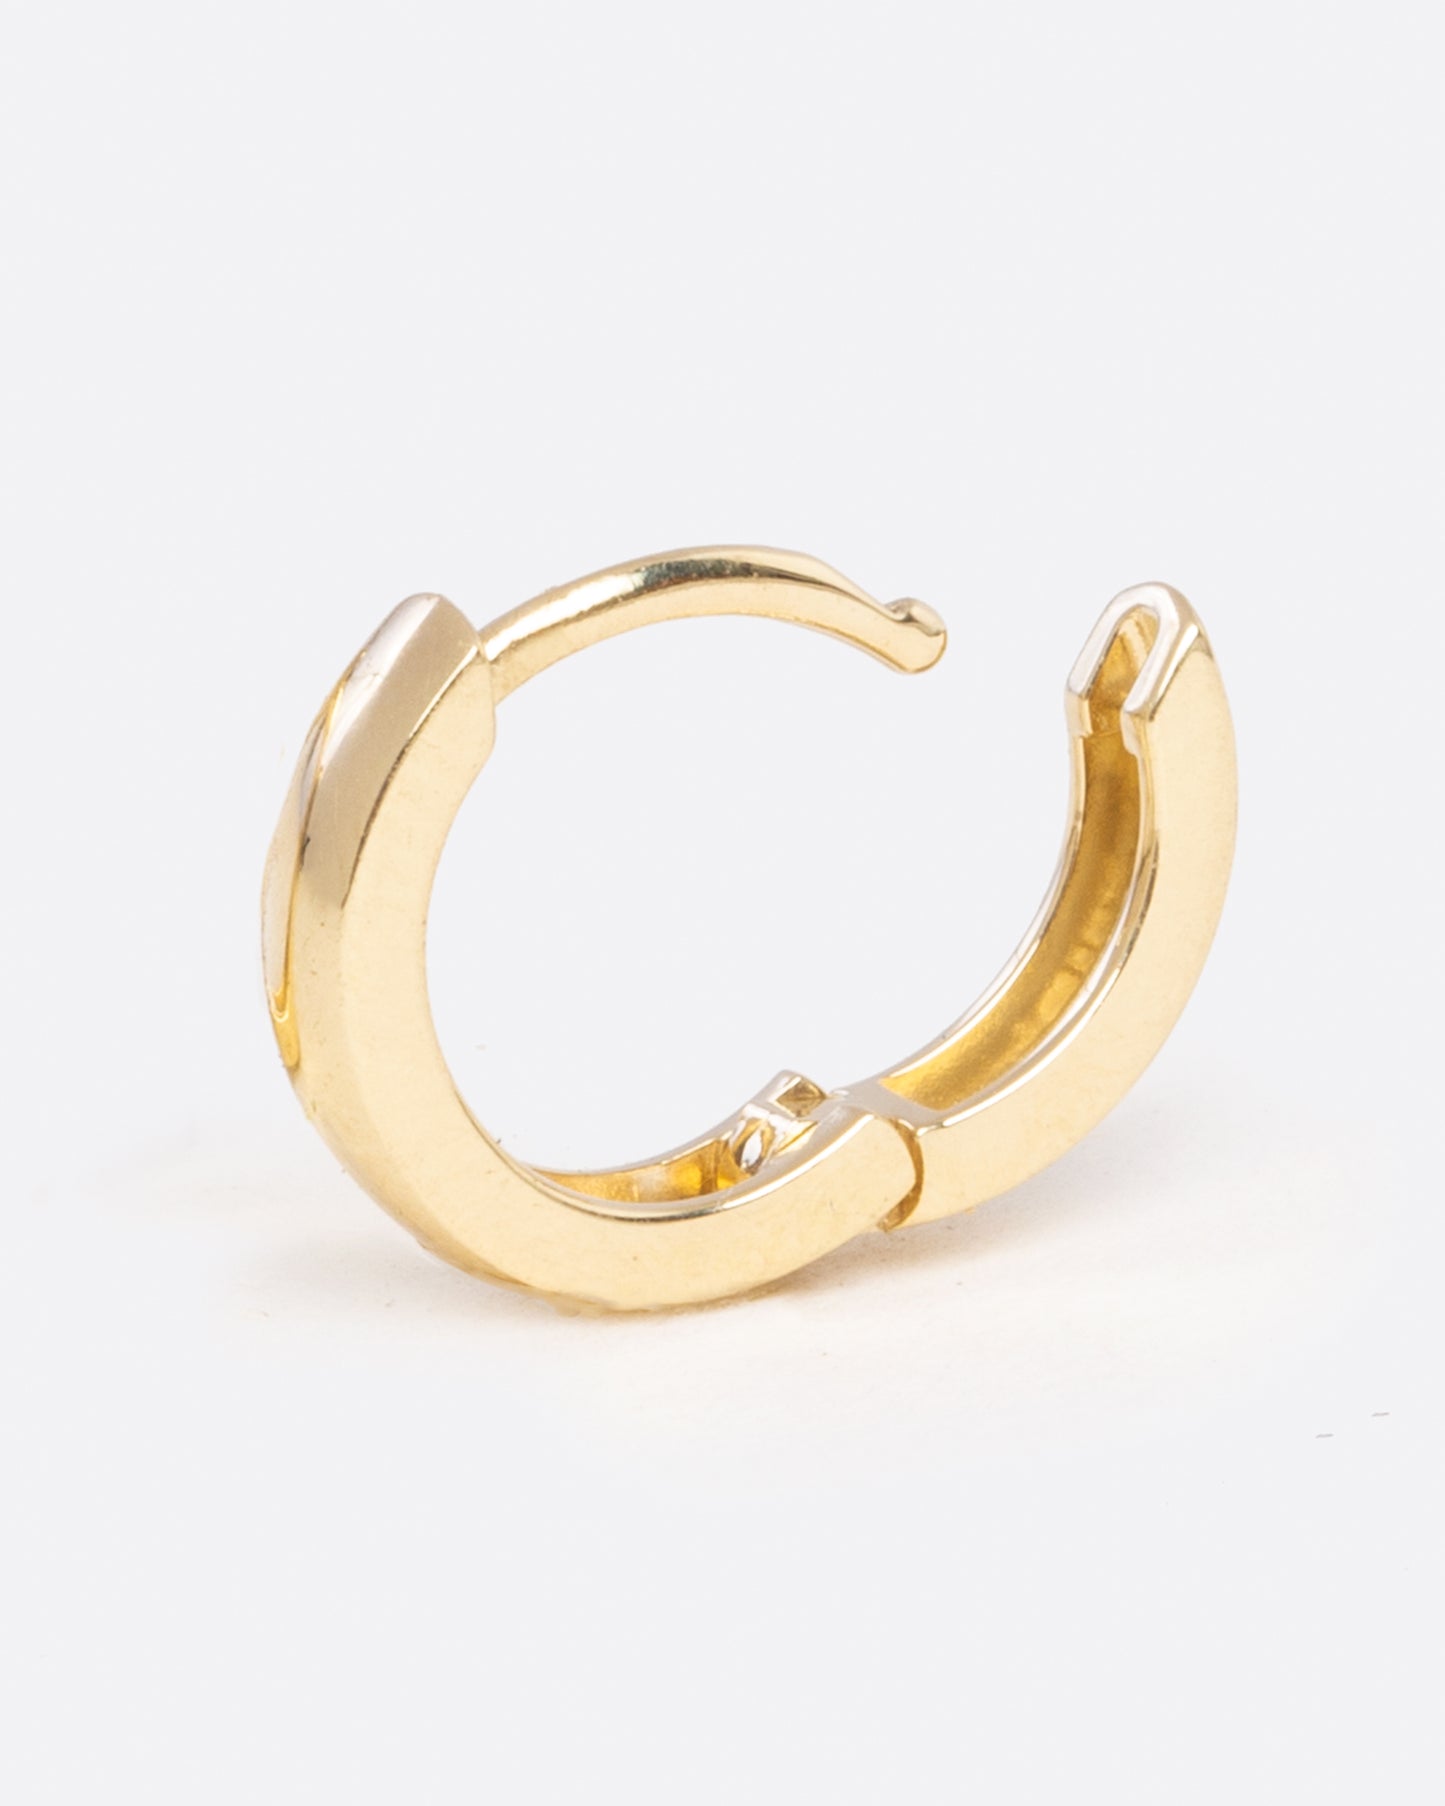 a tiny yellow gold hoop earring with a hinge in the middle, shown open